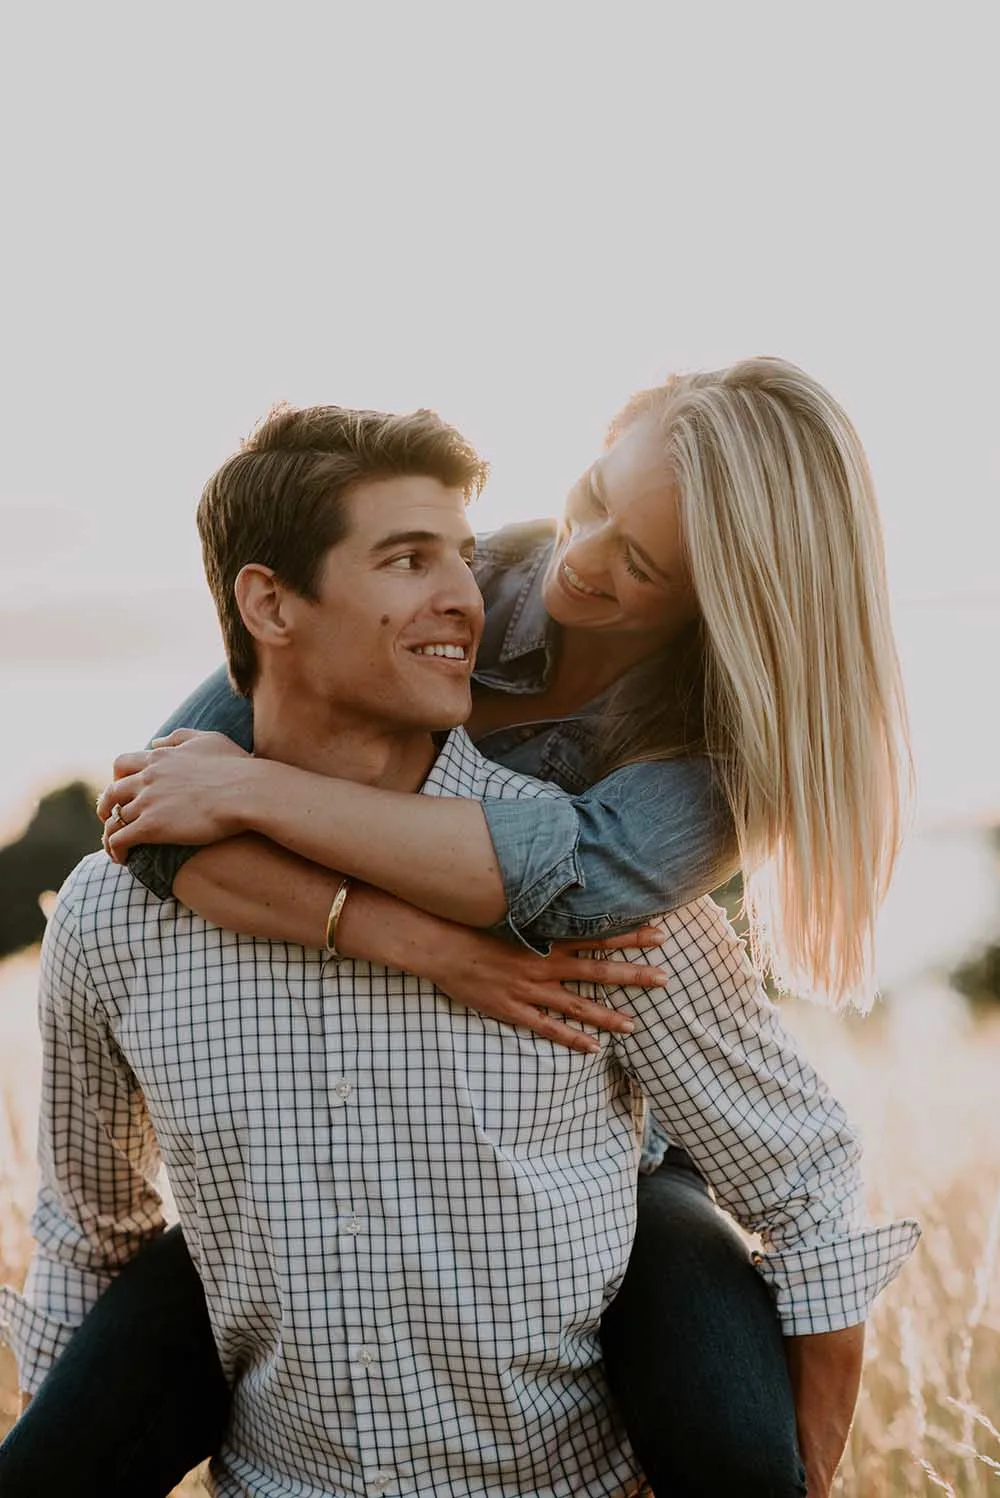 The holiday season is a busy time and it's easy to let emotions boil over into arguments. This is how you can stay connected to your husband this Christmas.